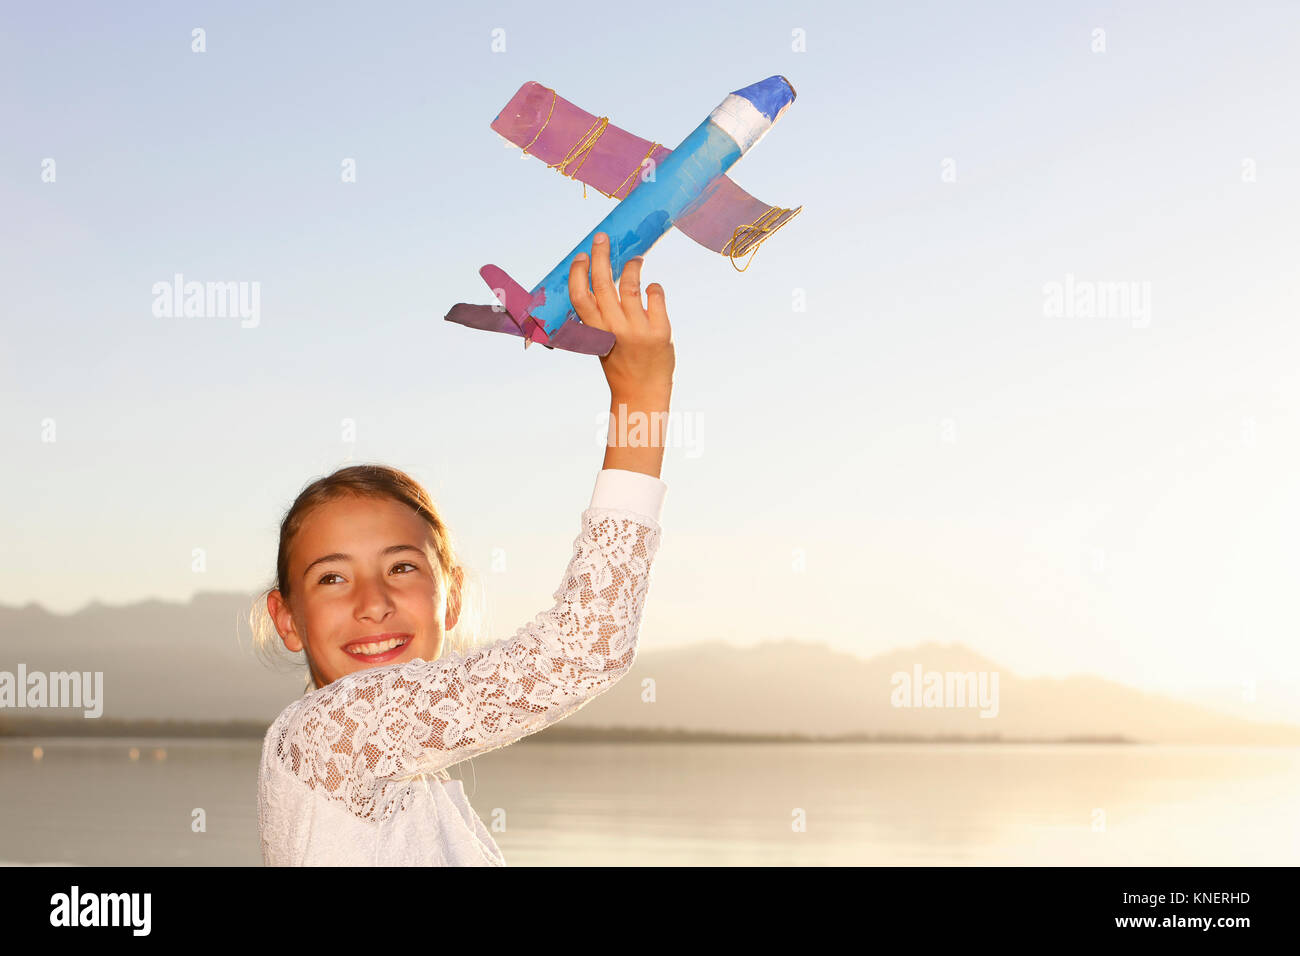 Young girl, outdoors, playing with toy aeroplane Stock Photo